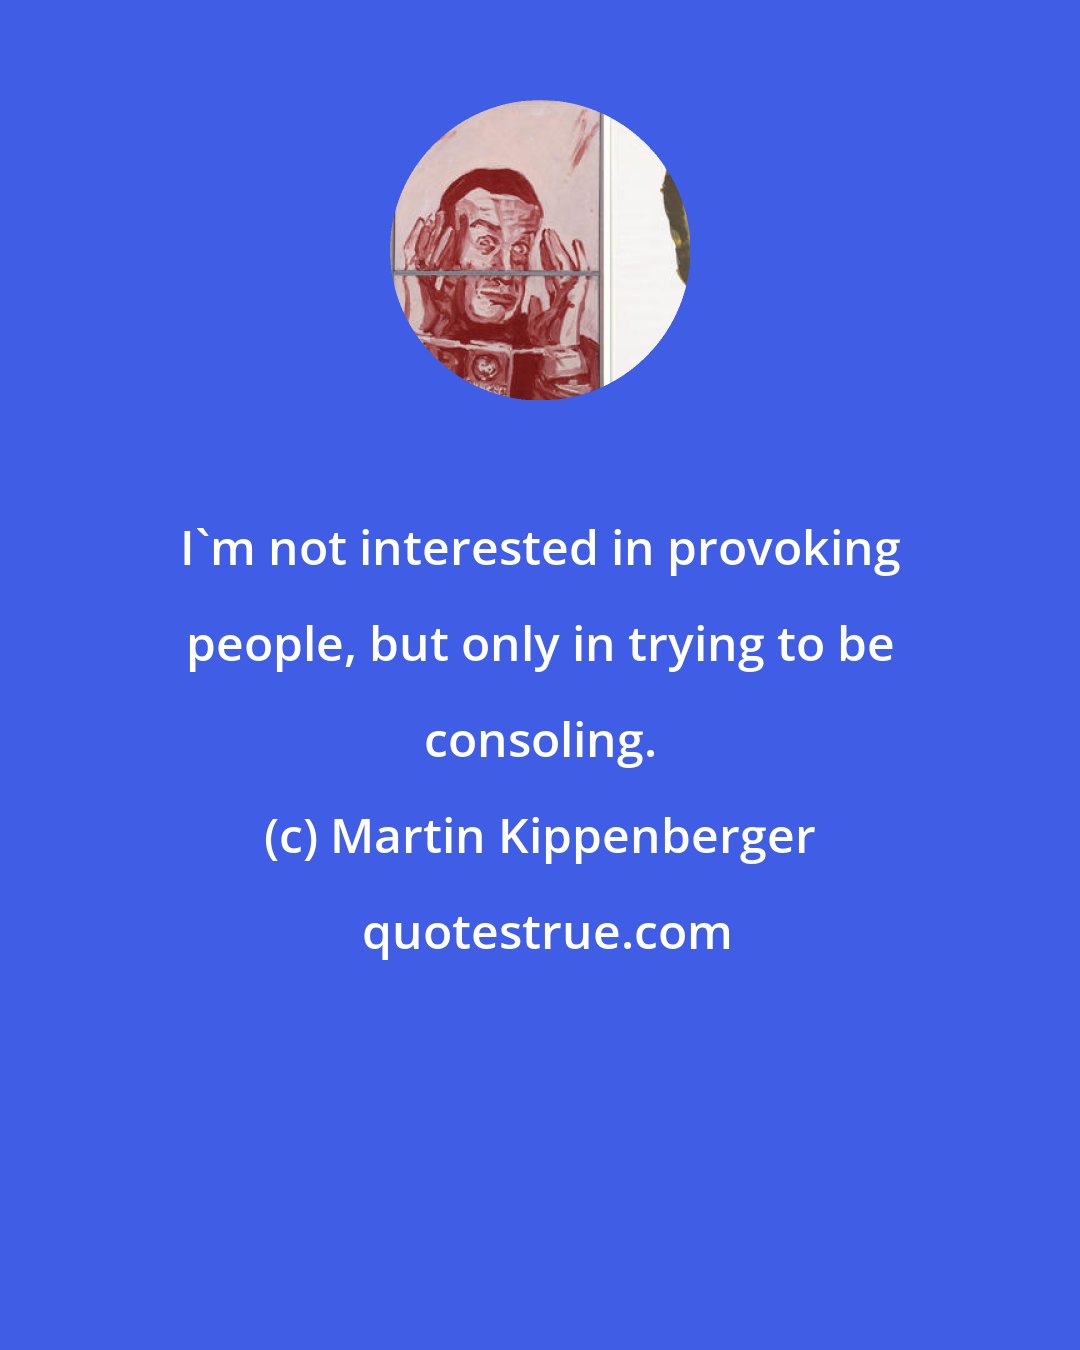 Martin Kippenberger: I'm not interested in provoking people, but only in trying to be consoling.